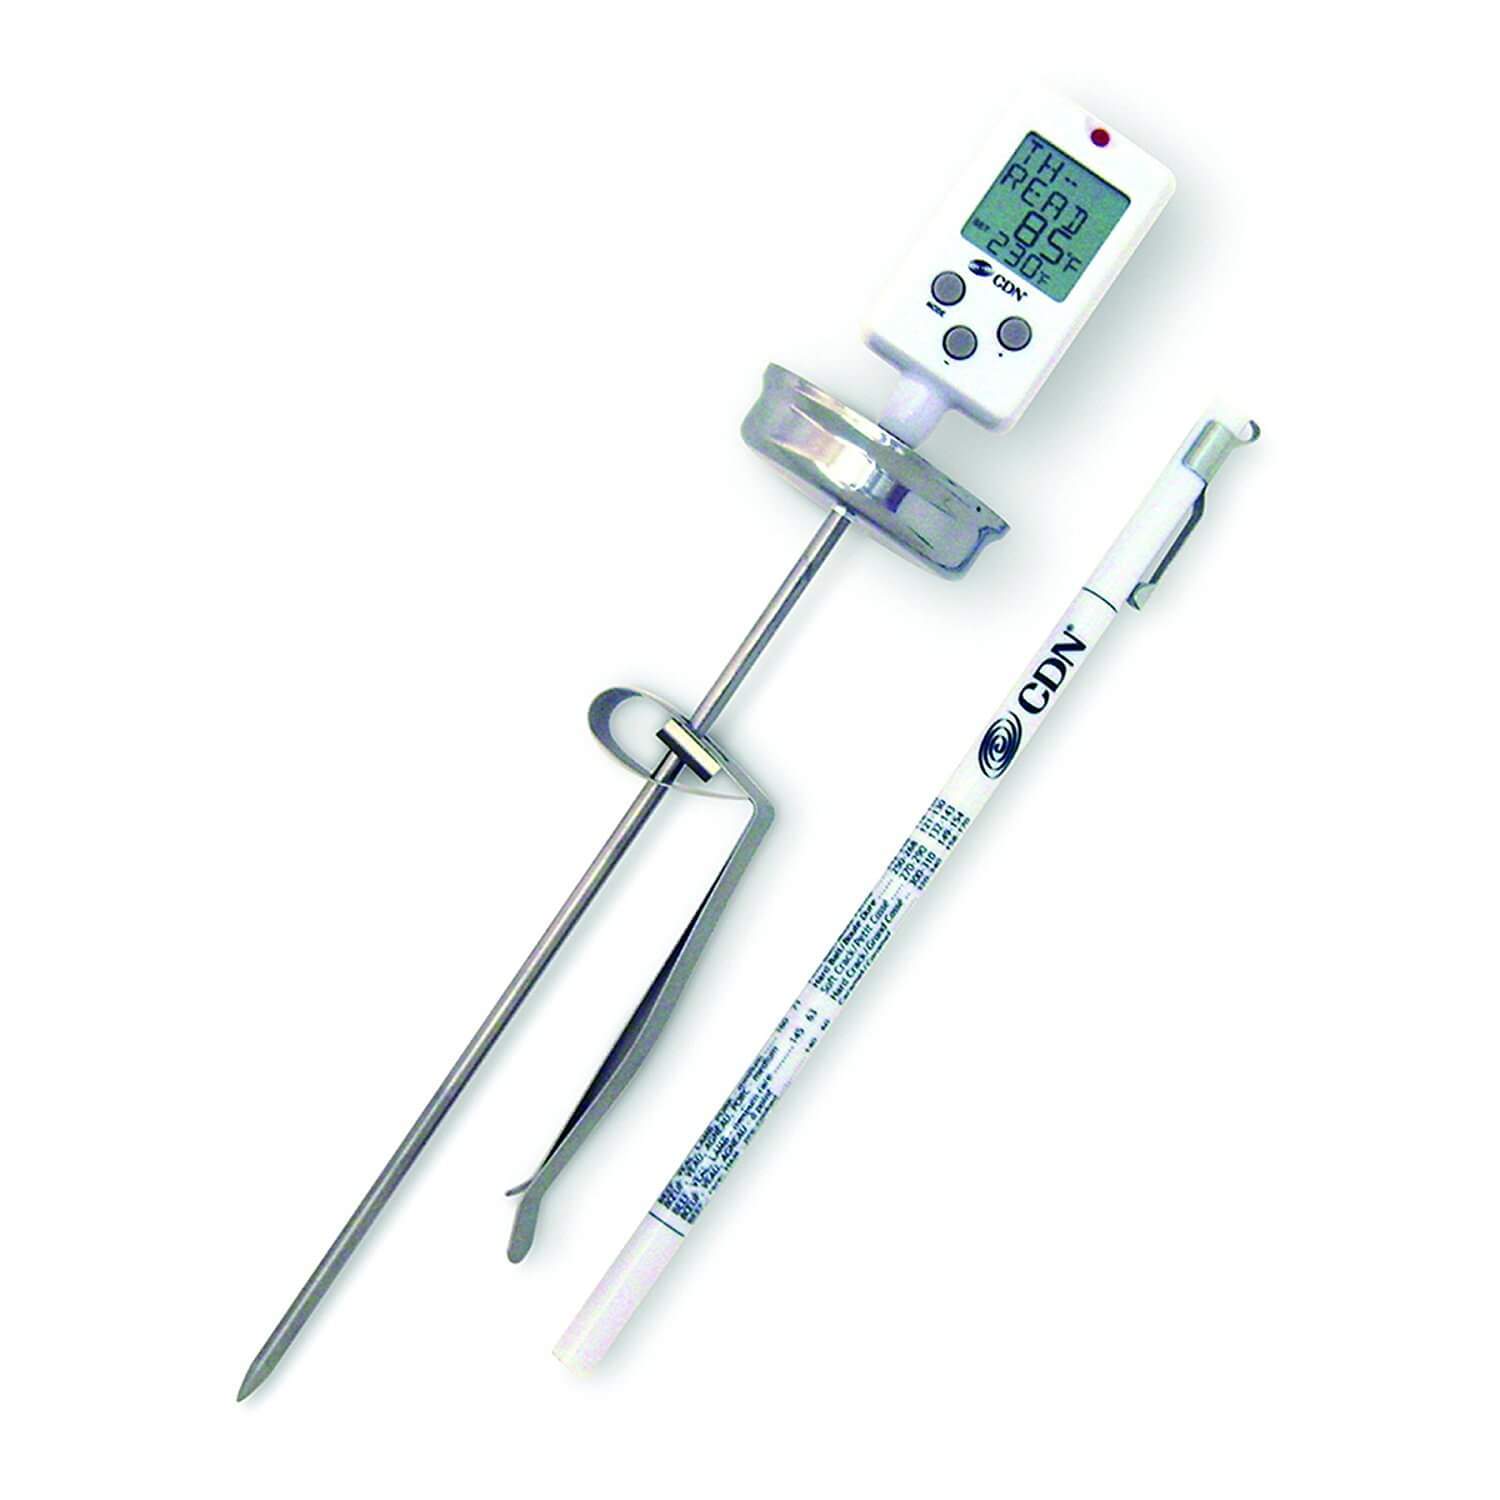 CDN DTC450 Digital Pre-Programmed & Programmable Candy Thermometer